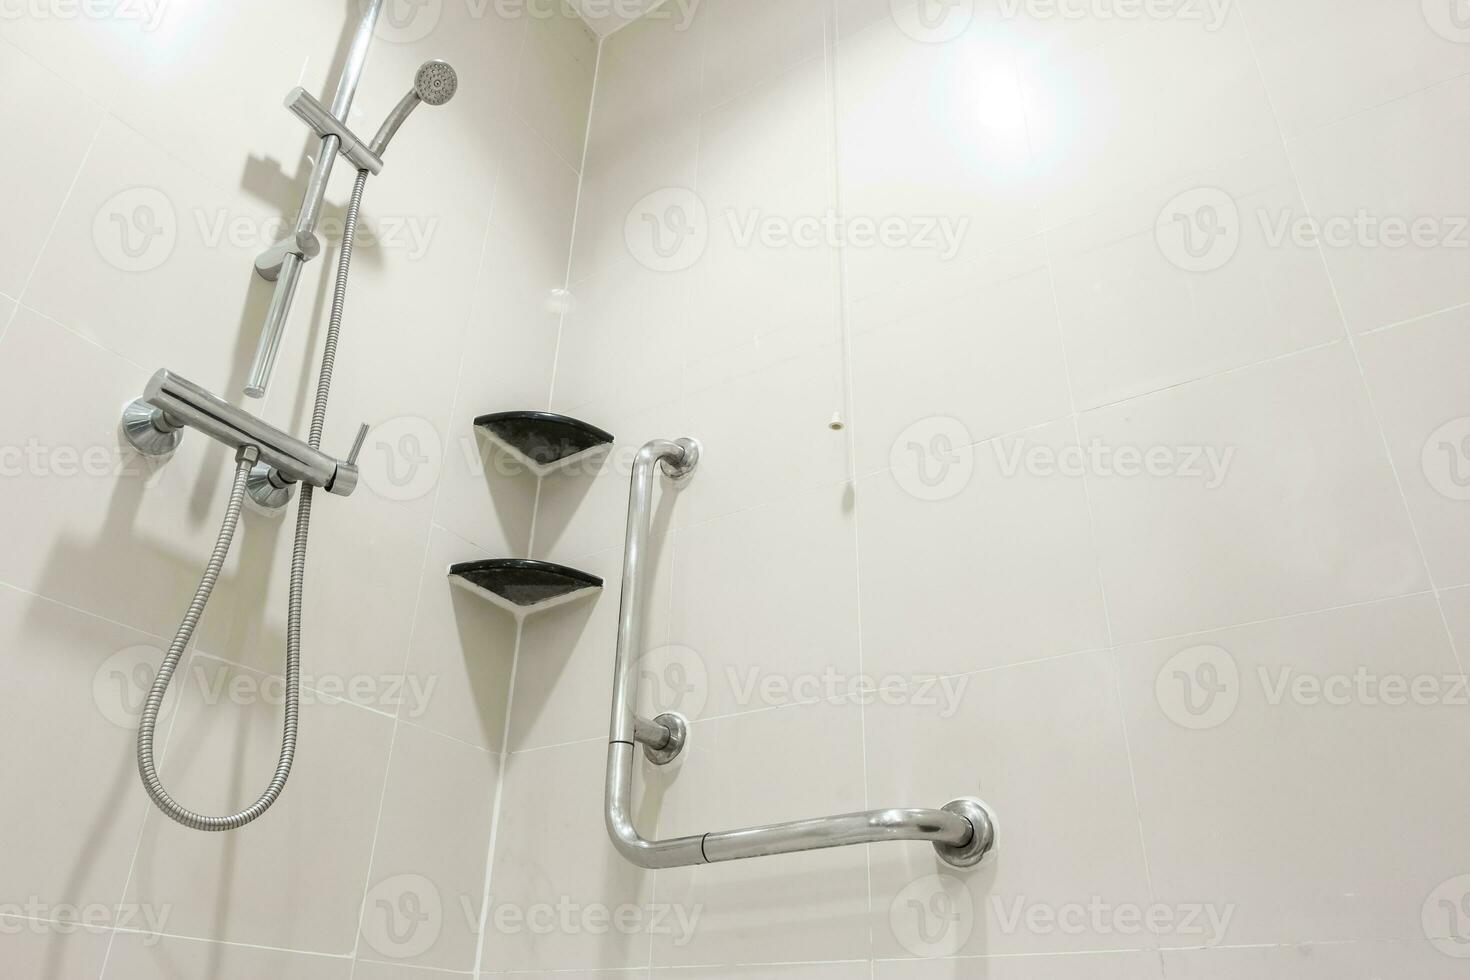 Toilet shower and handrail for elderly people at the bathroom in hospital, safty and medical concept photo